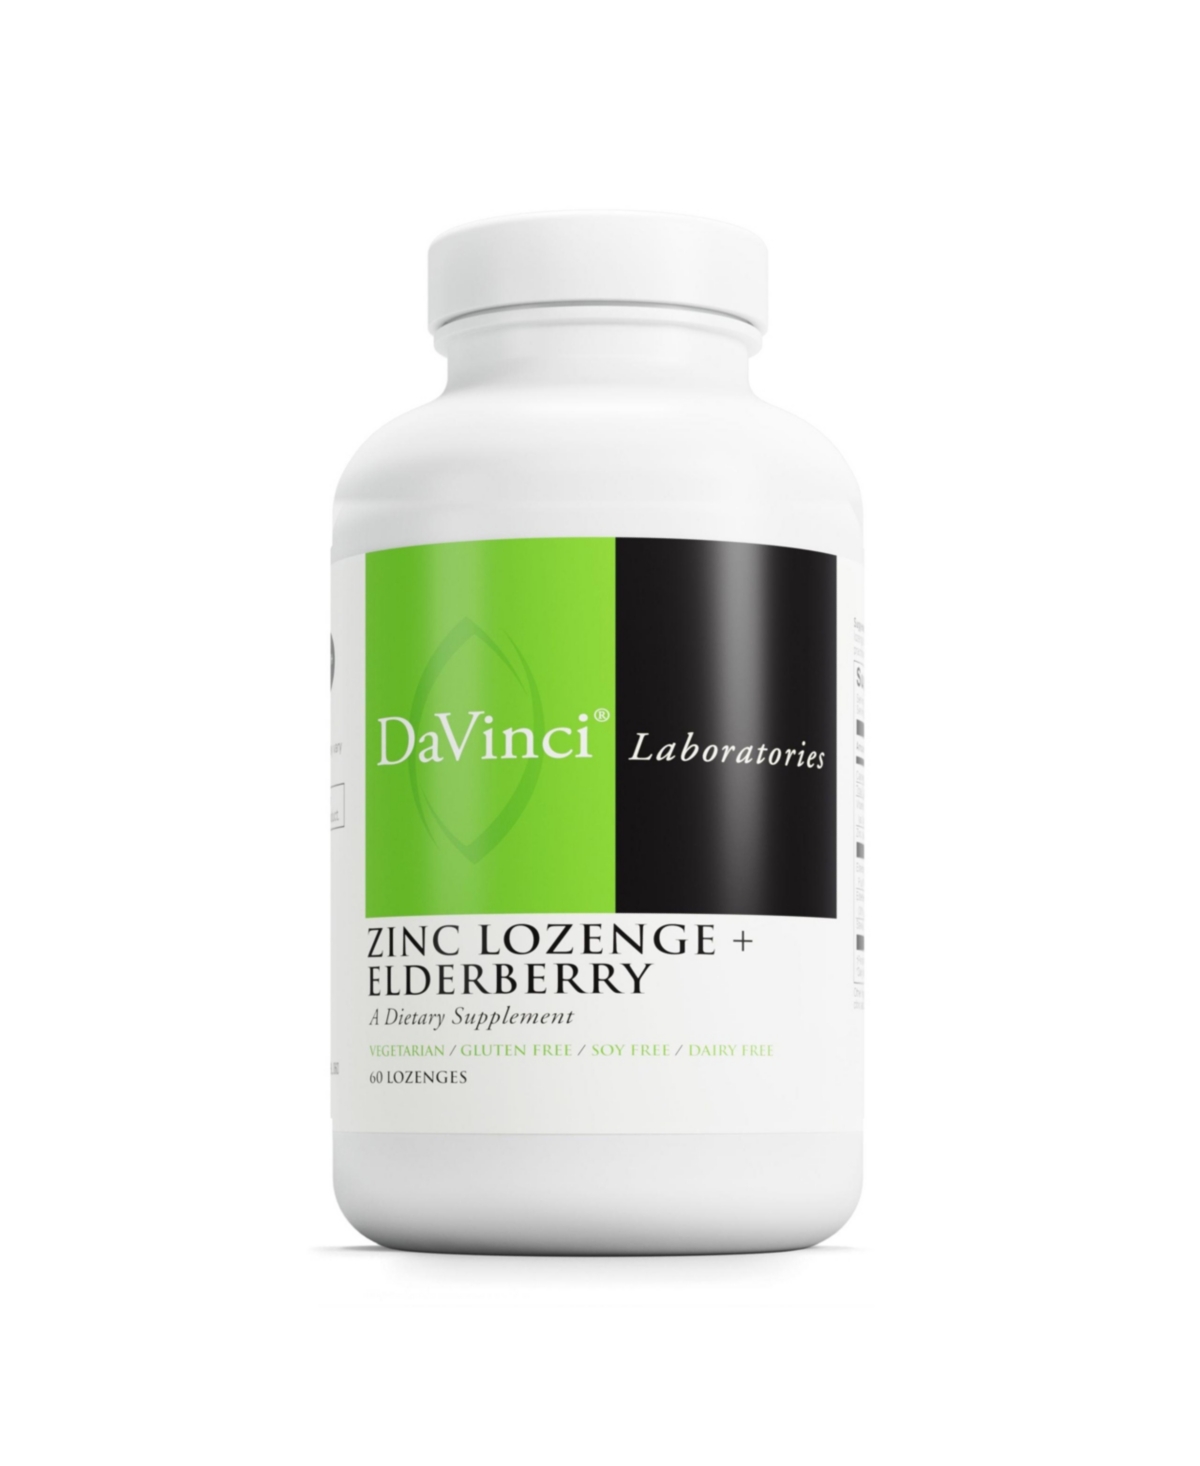 DaVinci Labs Zinc Lozenge + Elderberry - Zinc Supplement to Support the Immune System, Healthy Lungs and Throat Tissues - With Vi